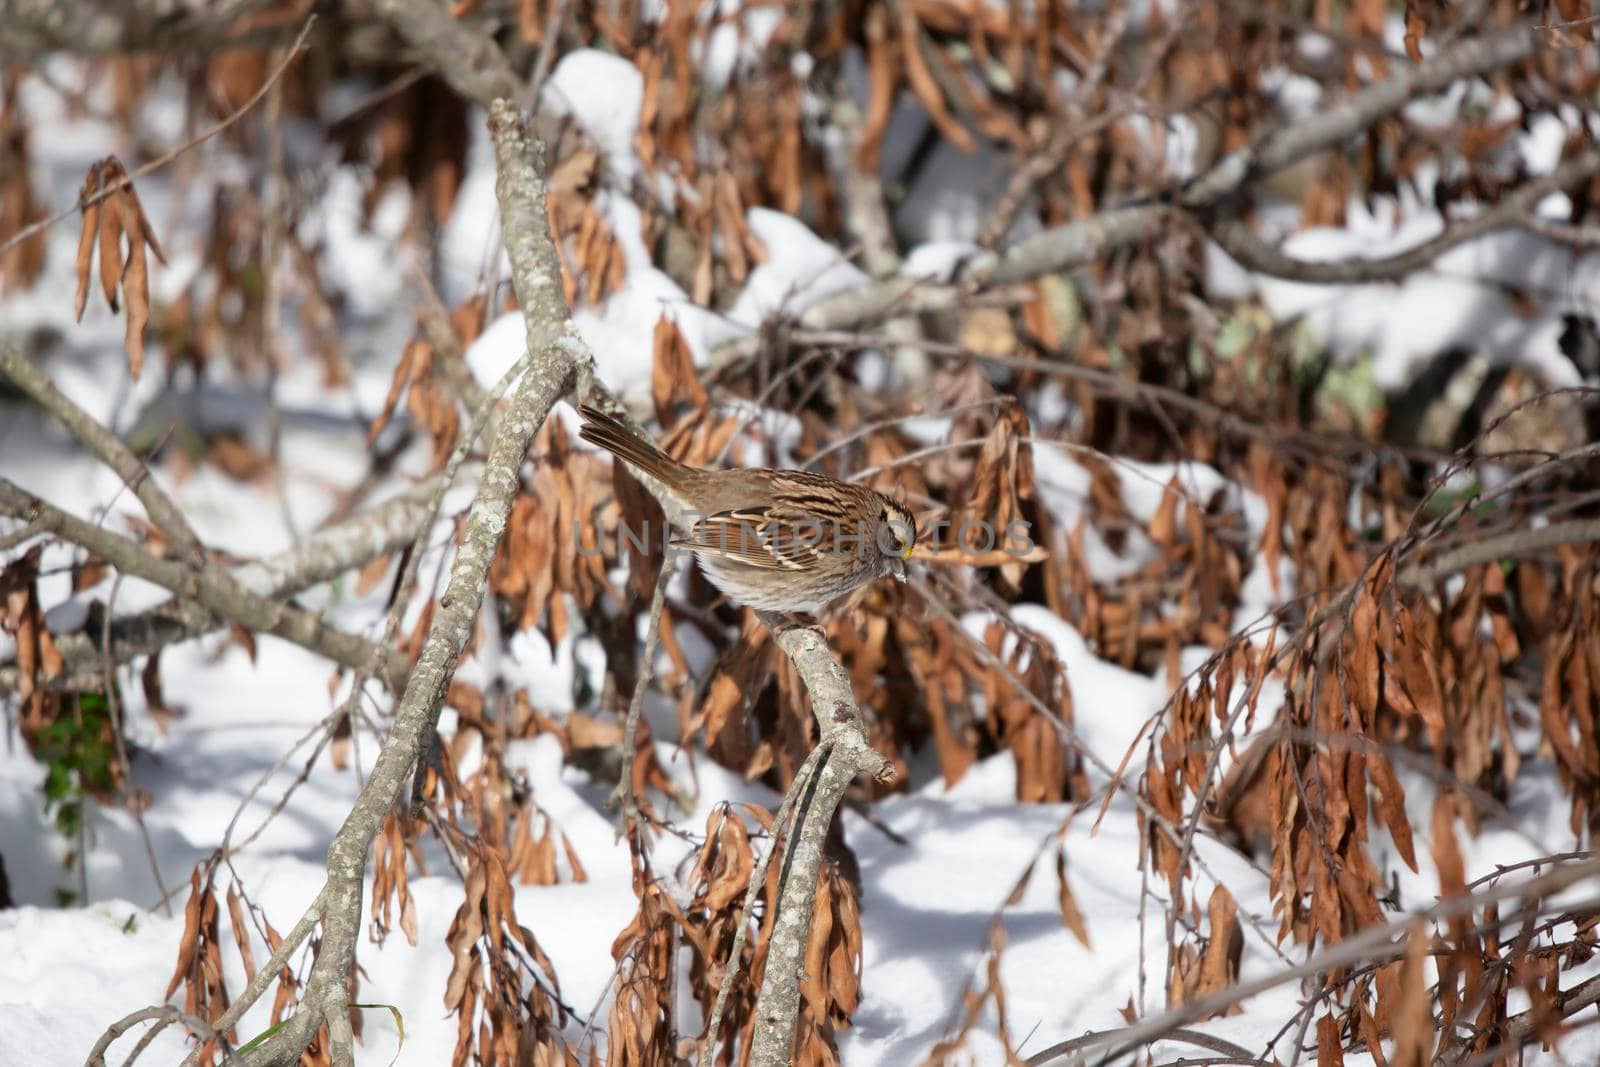 White-throated sparrow (Zonotrichia albicollis) looking down from its perch on a fallen tree limb on a snowy day